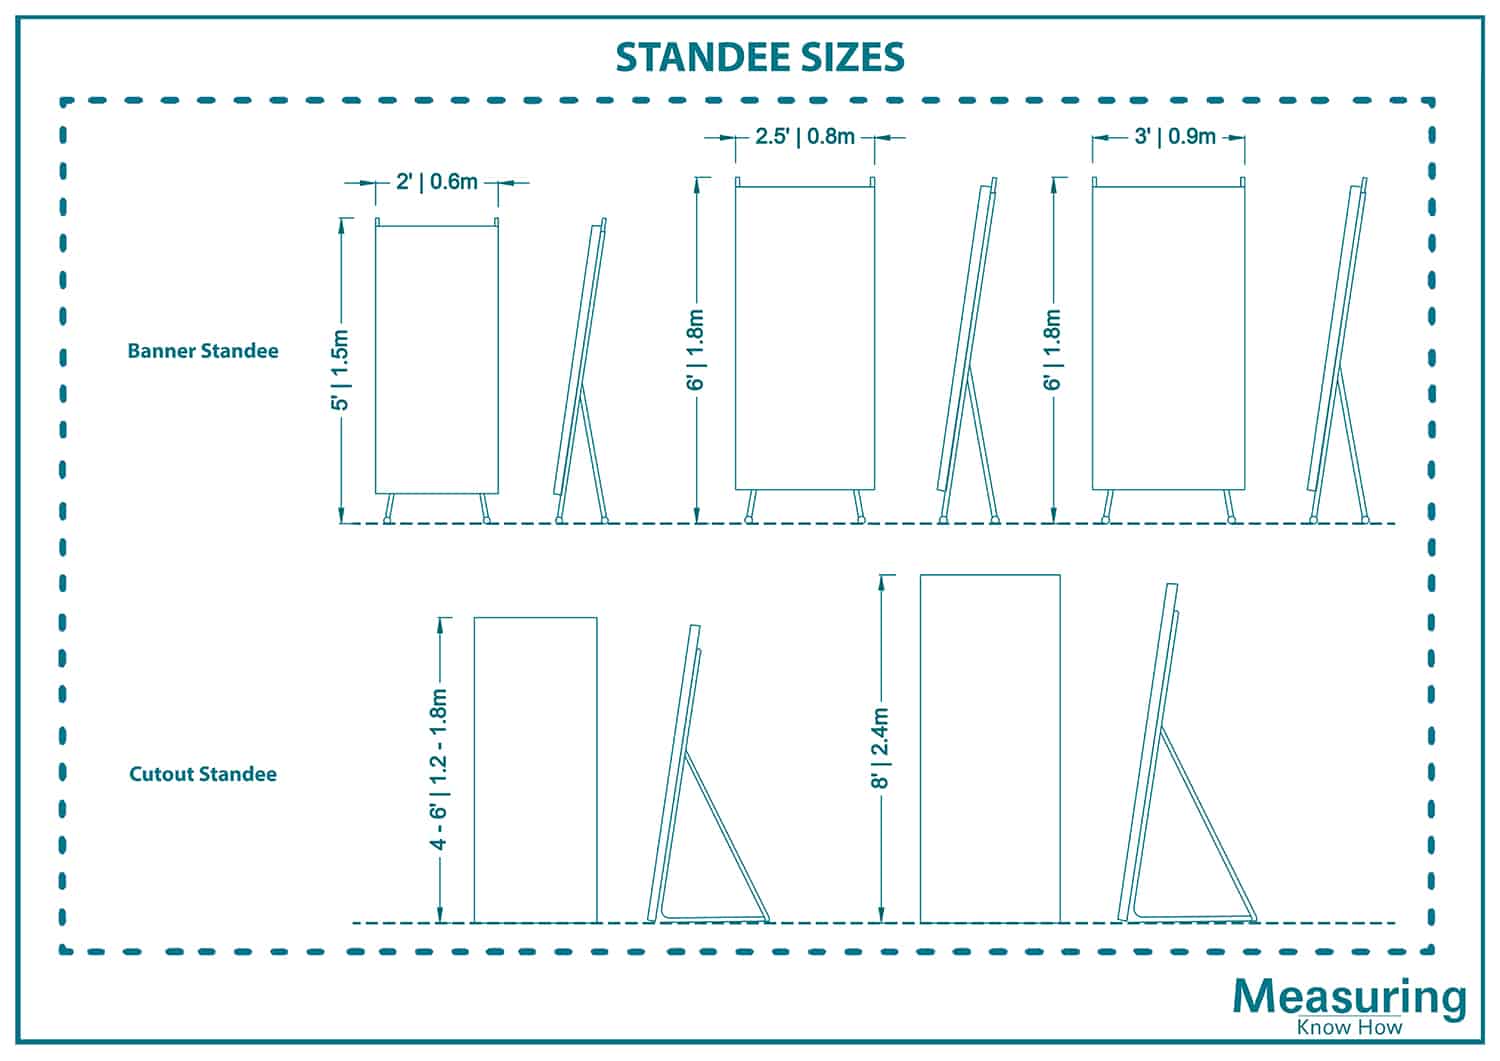 Standee sizes